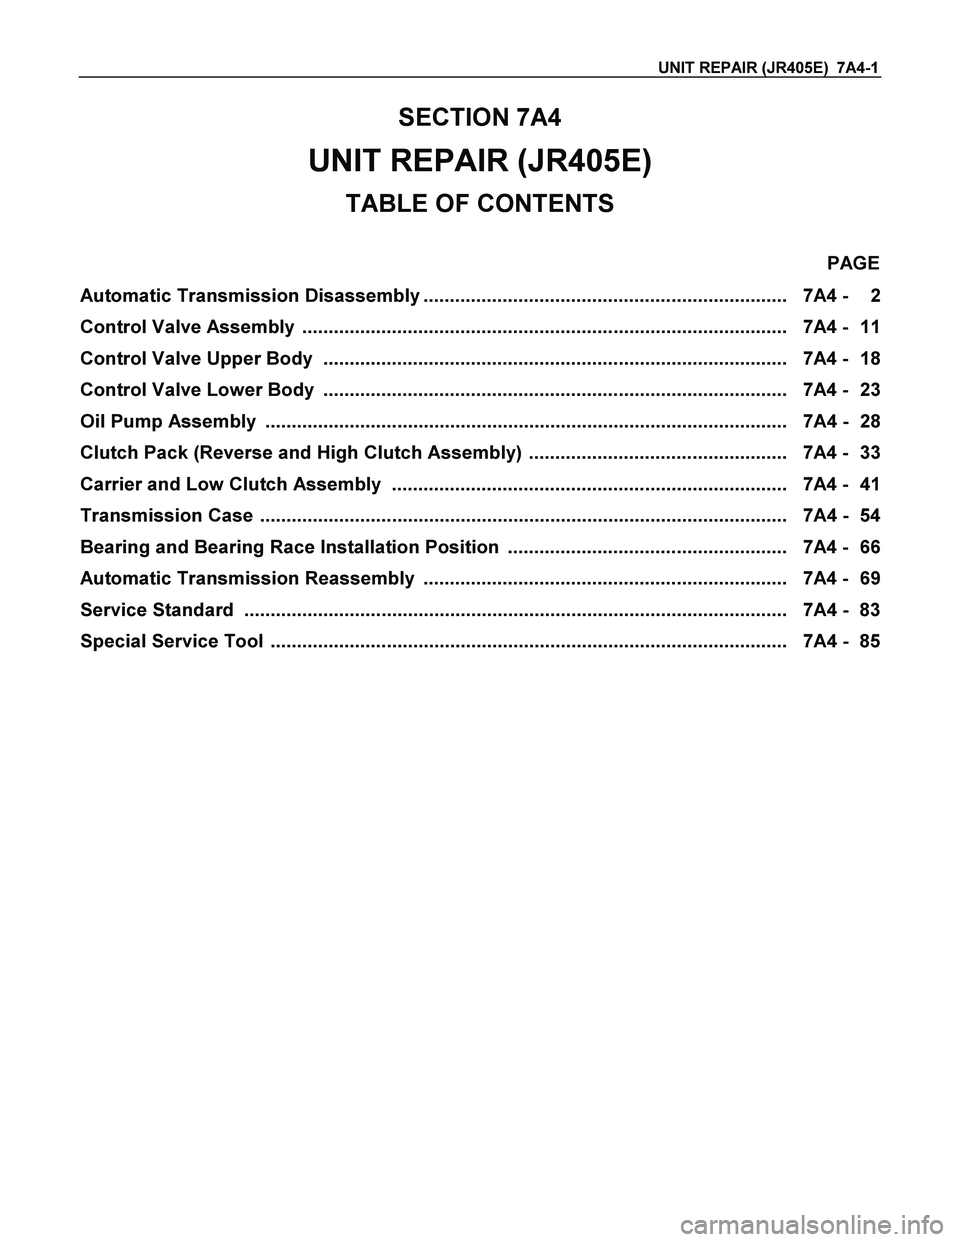 ISUZU TF SERIES 2004  Workshop Manual UNIT REPAIR (JR405E)  7A4-1 
SECTION 7A4 
UNIT REPAIR (JR405E) 
TABLE OF CONTENTS 
 PAGE 
Automatic Transmission Disassembly .....................................................................   7A4